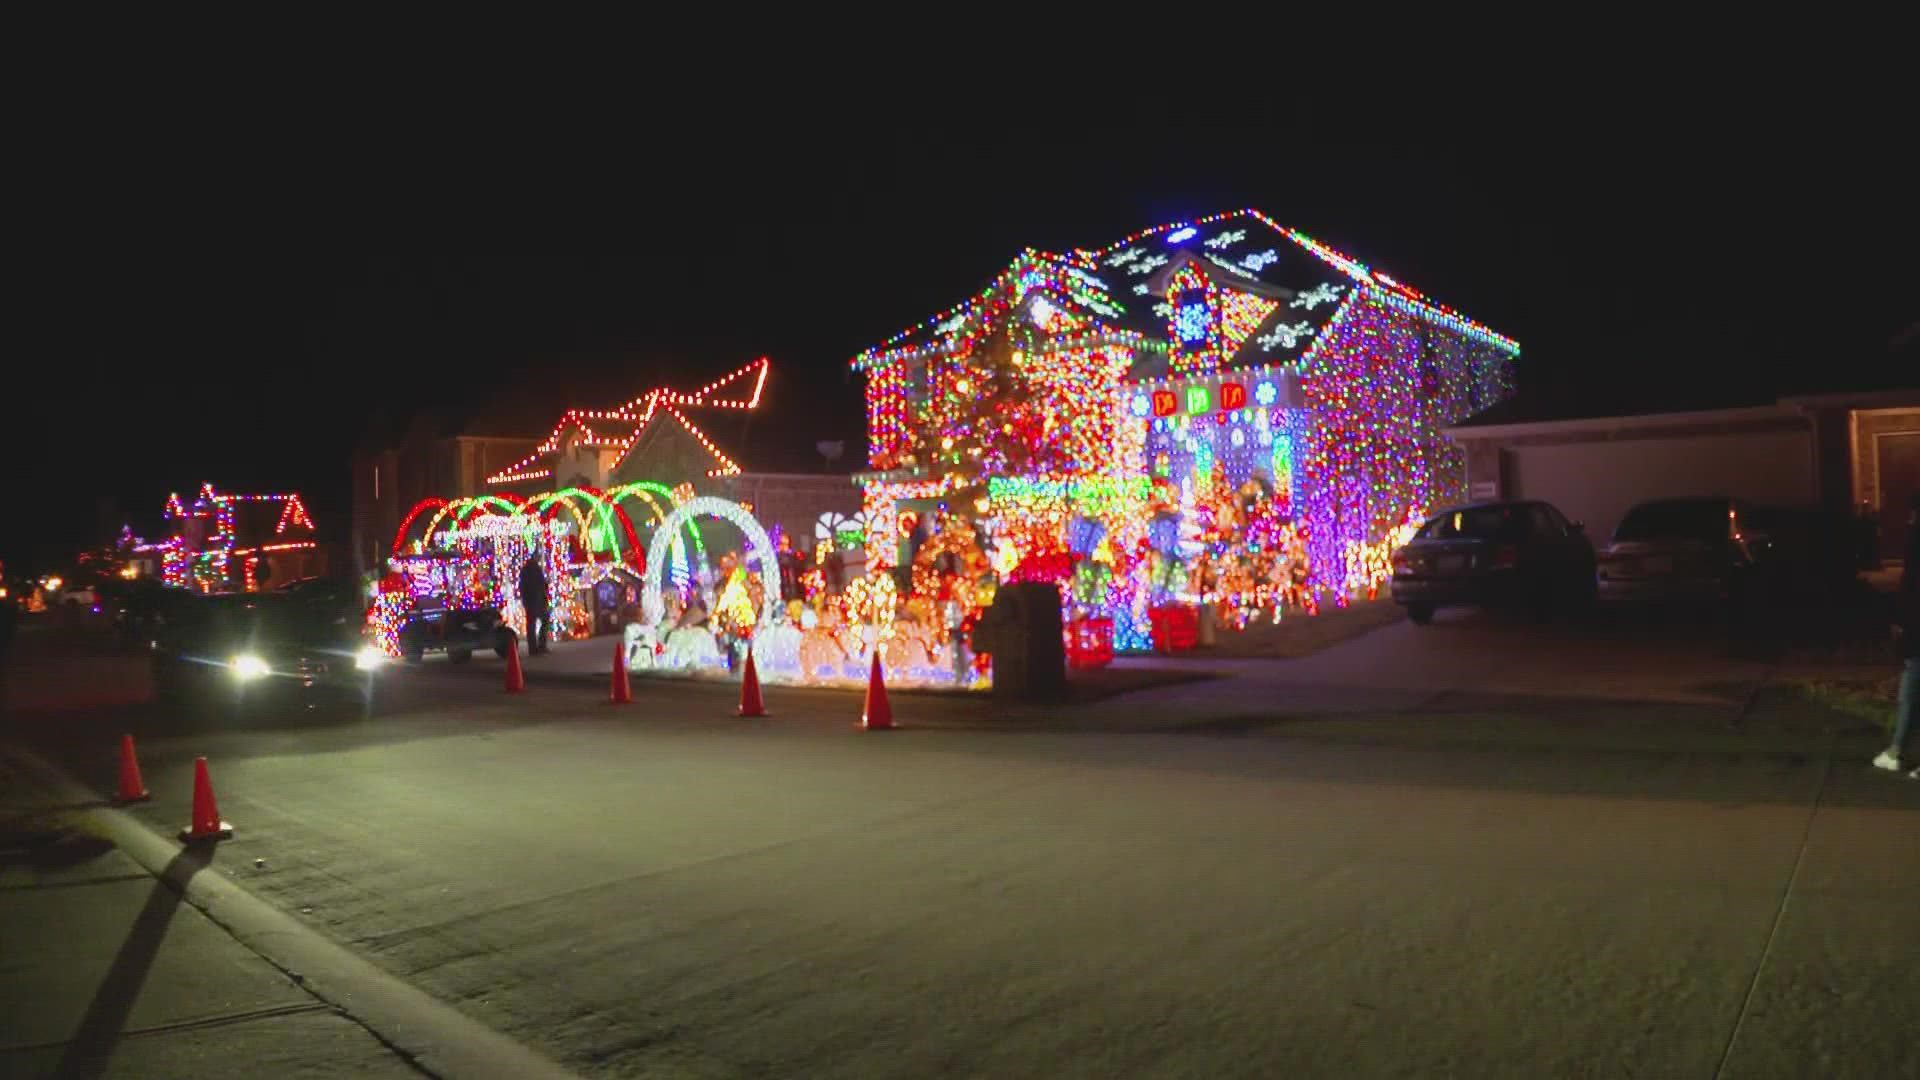 The house features 80,000 lights, 300 holiday pieces arranged carefully on the lawn and an entire Christmas village that now encompasses their entire garage.